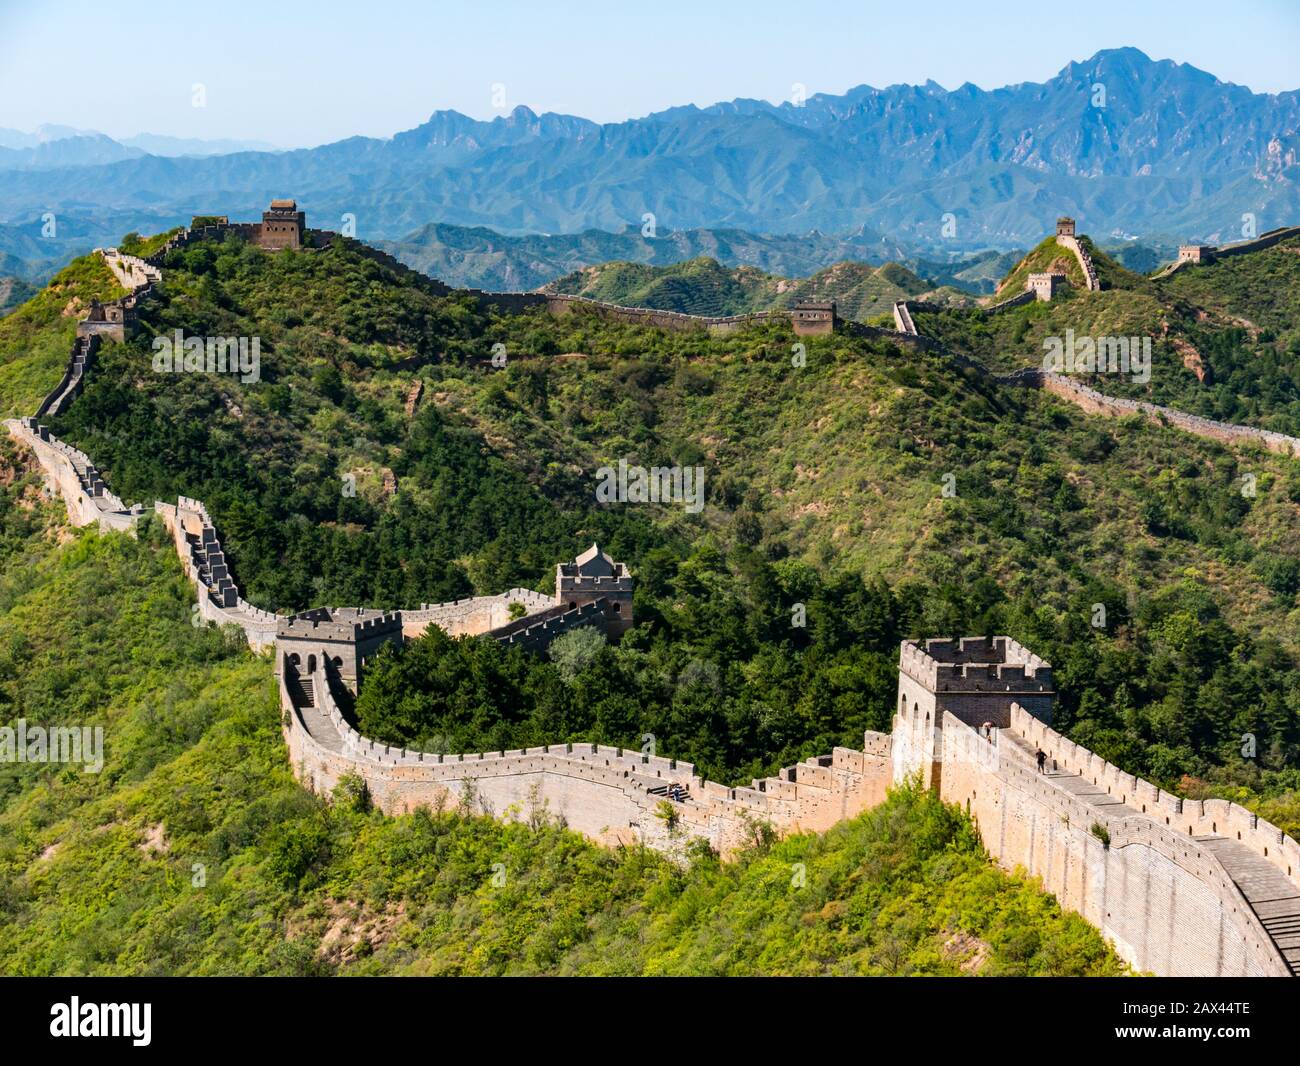 Ming dynasty Jinshanling Great Wall of China with watch towers on mountain ridge in sunny weather, Hebei Province, China, Asia Stock Photo